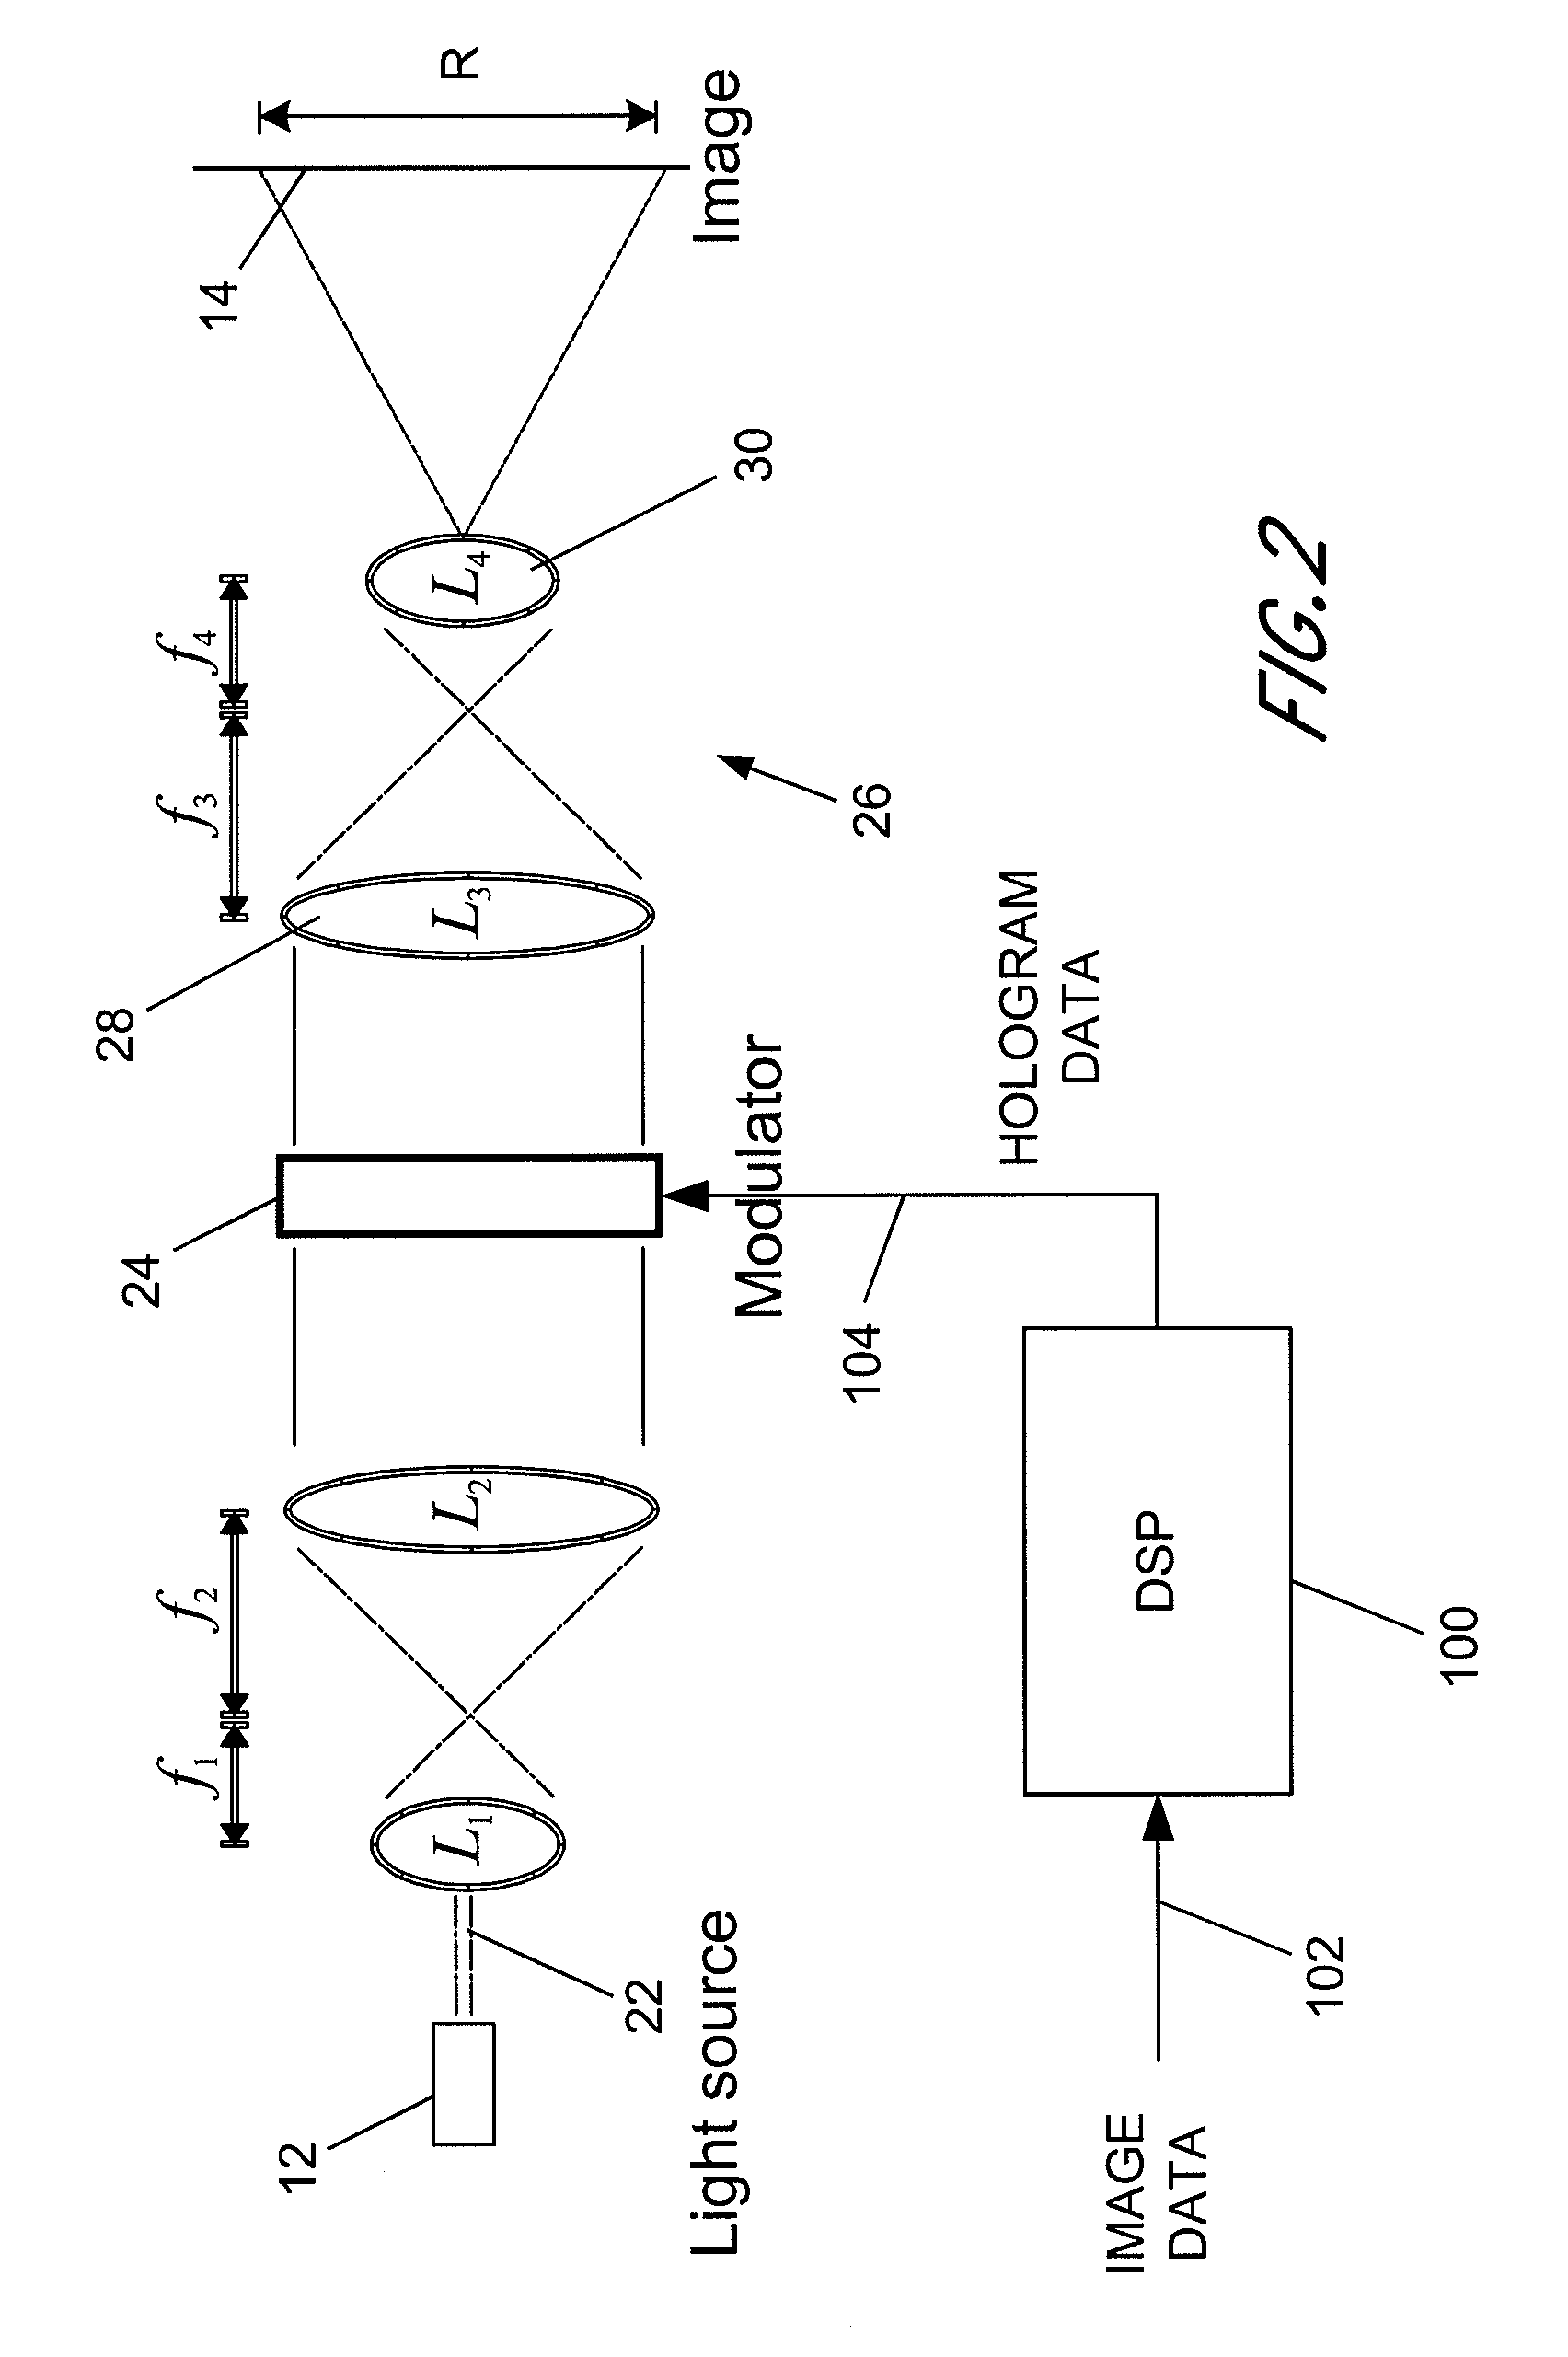 Holographic image display systems